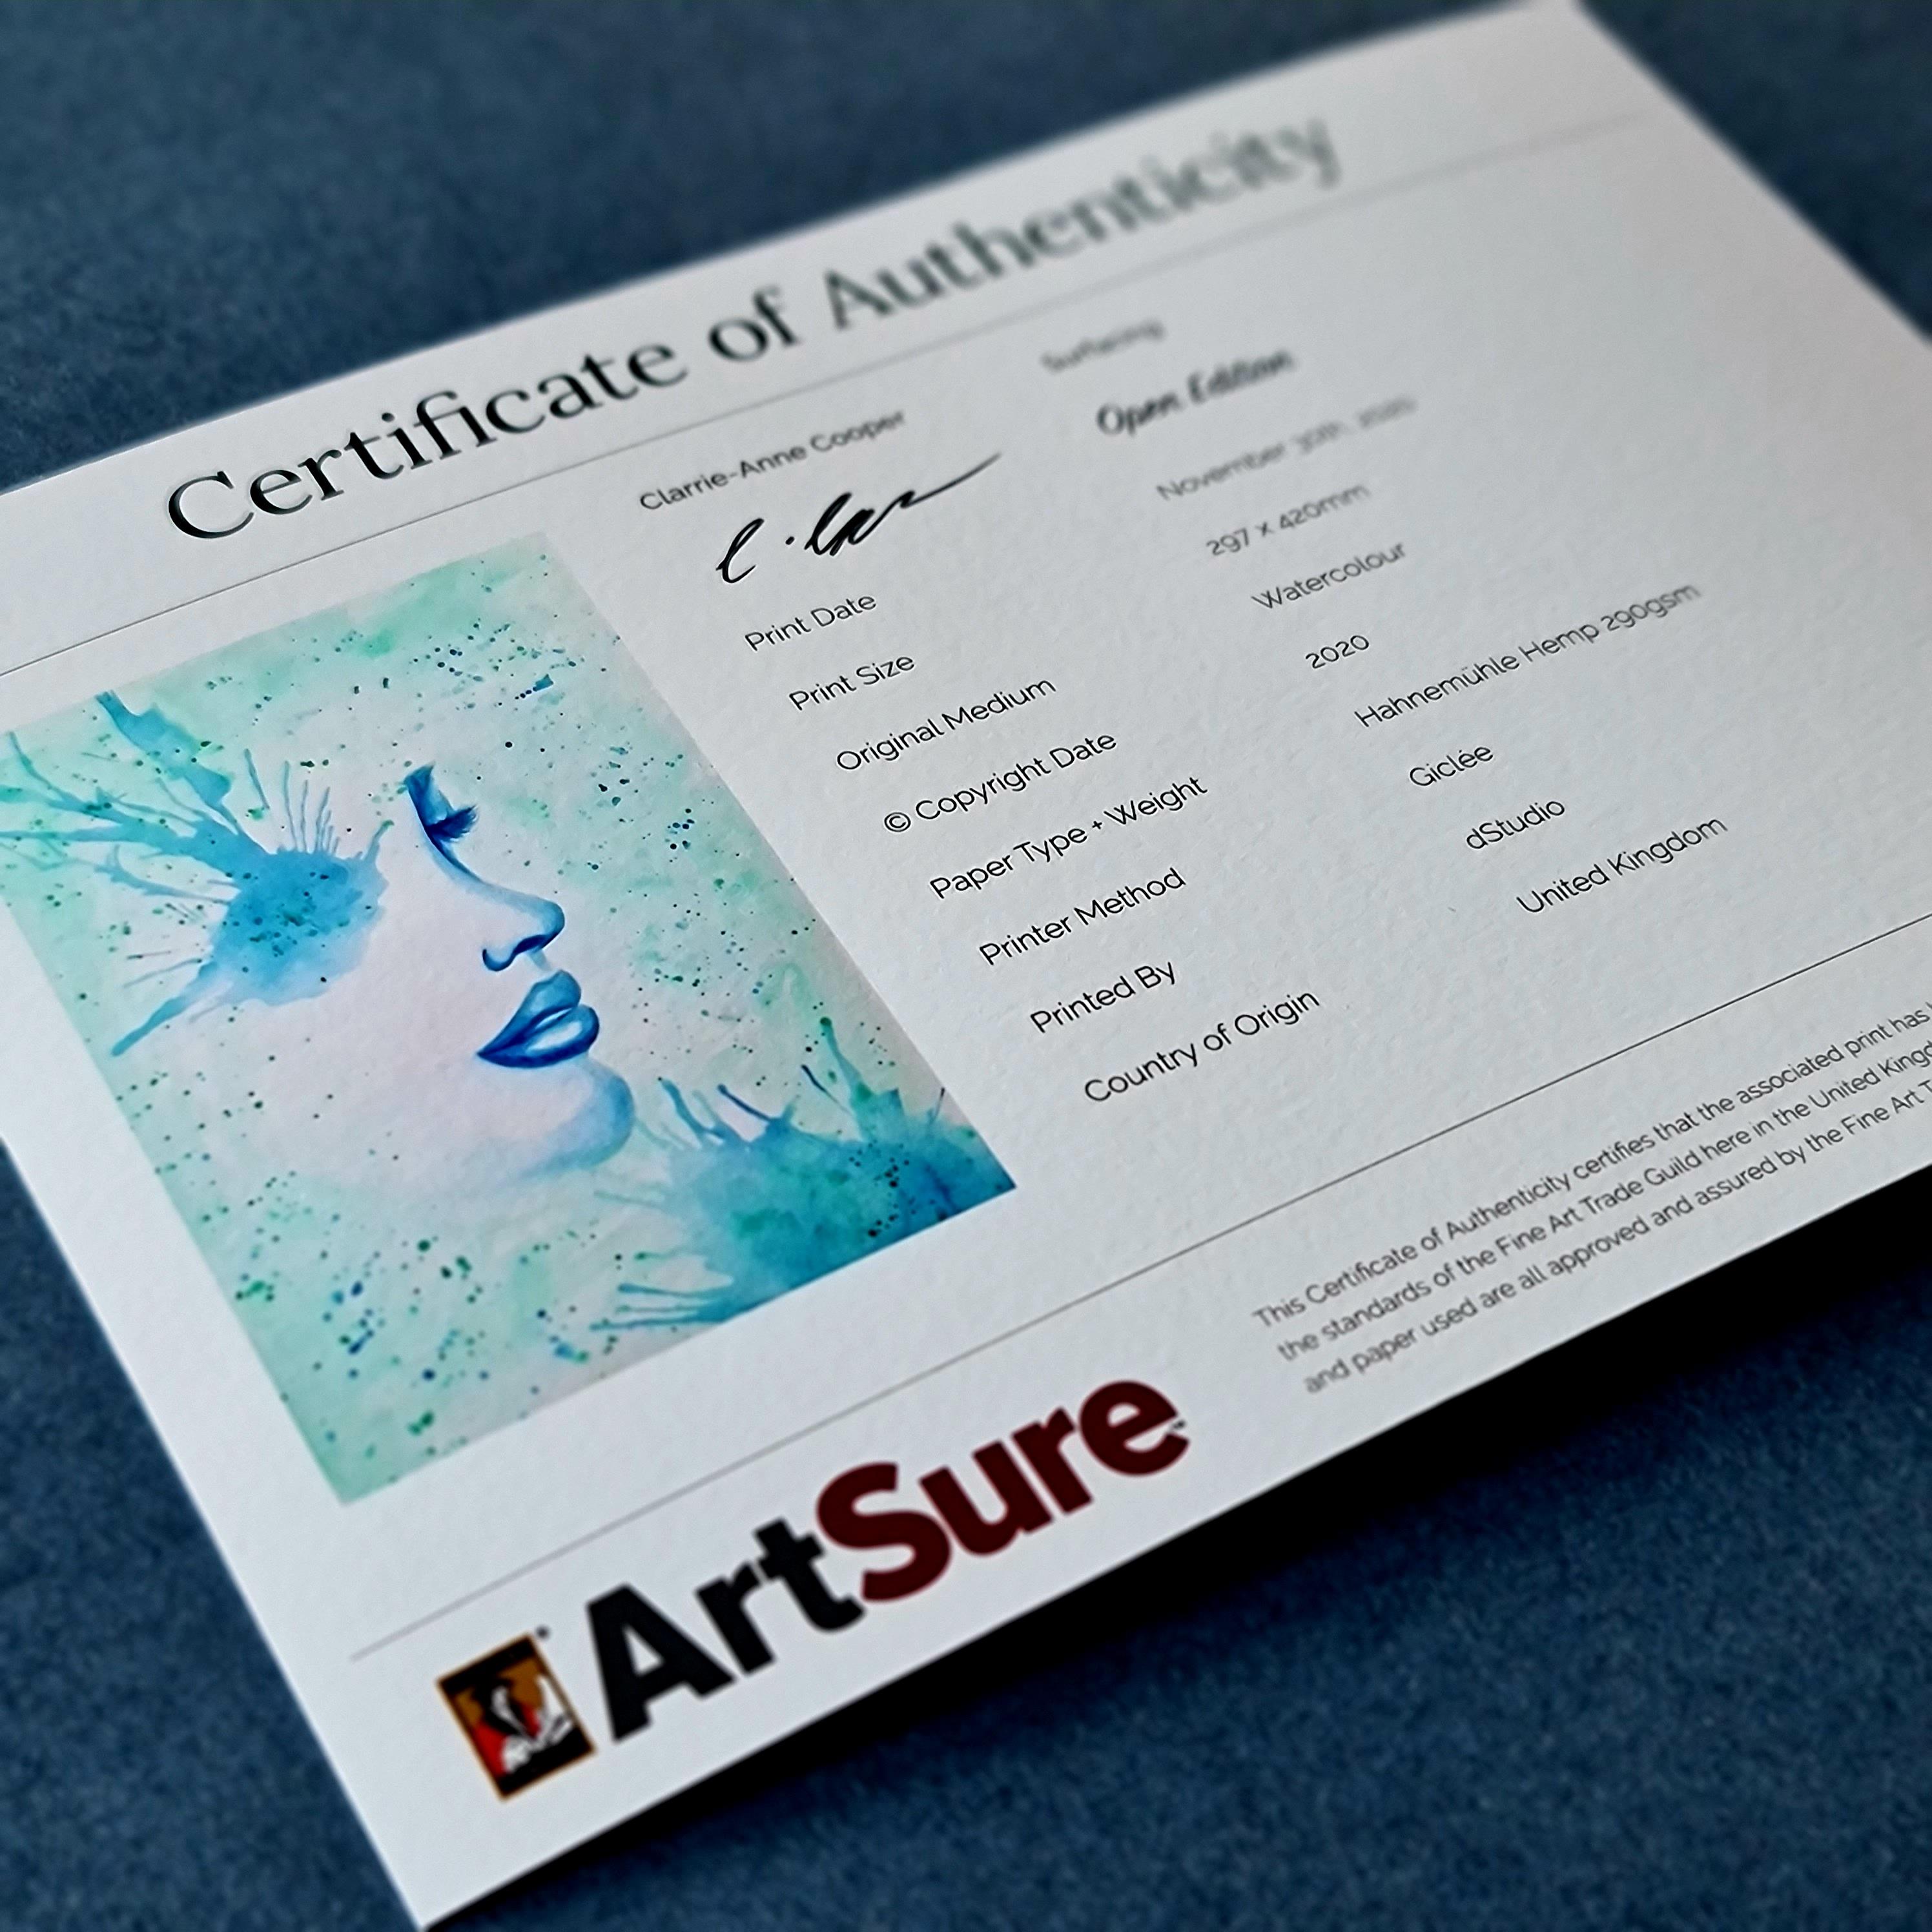 Example of certificate of authenticity.